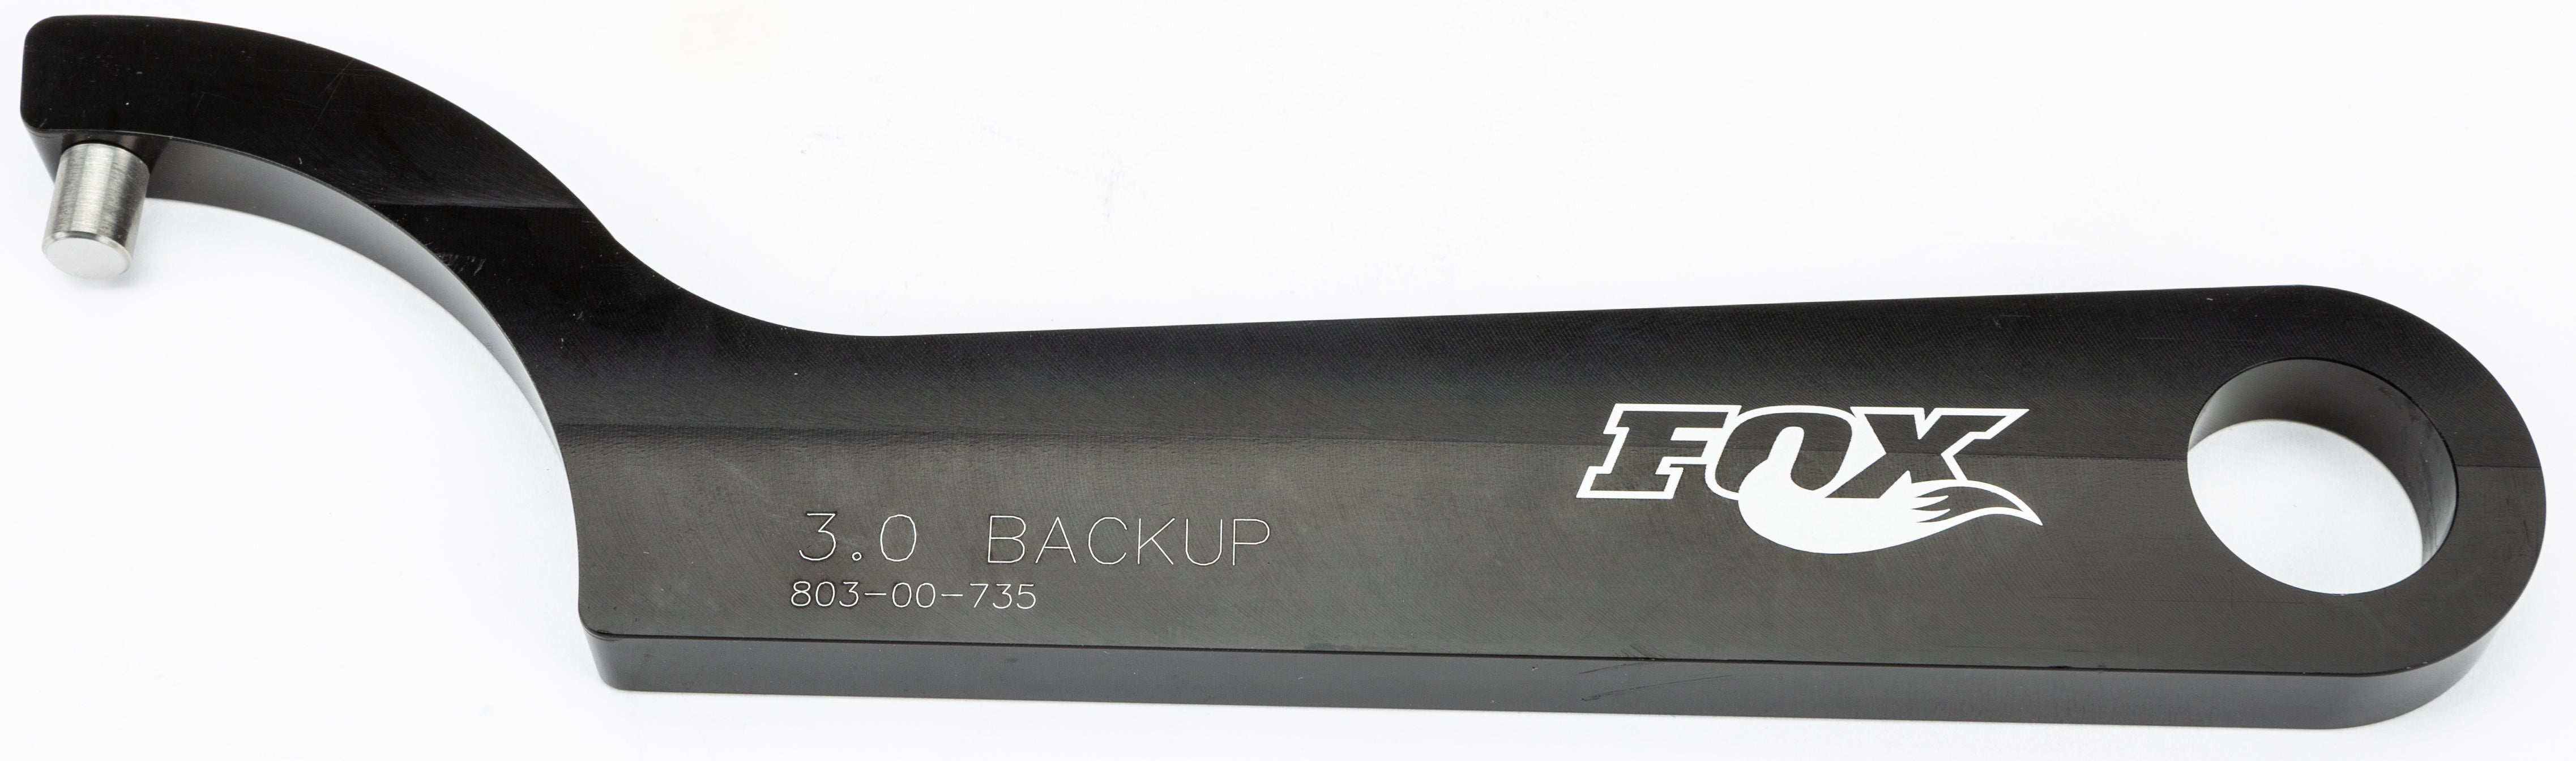 Spanner Wrench 3.0 Backup